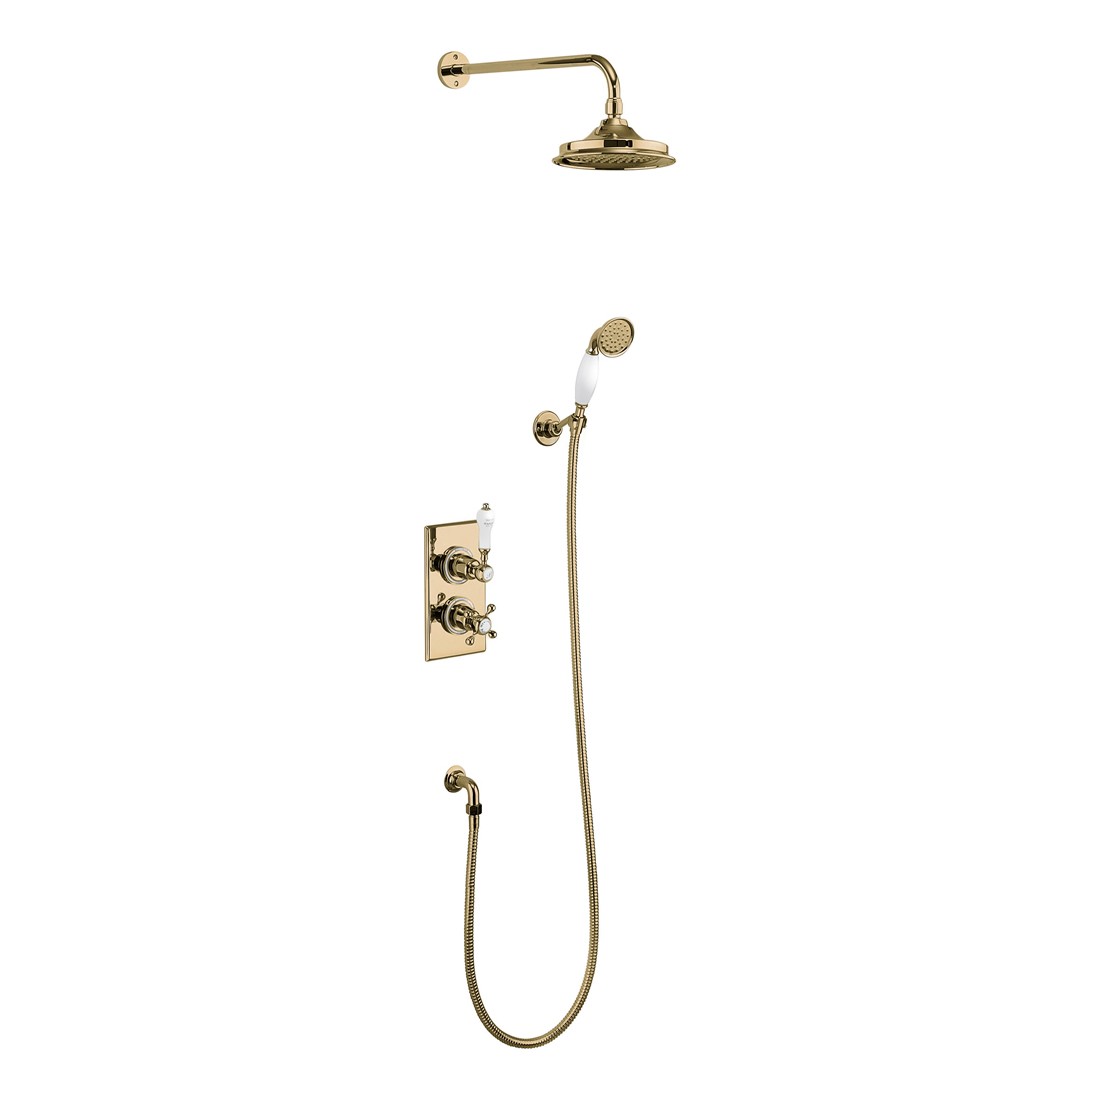 Burlington TF2SGOLD Trent Thermostatic Concealed Shower Valve 2 Outlet with Fixed Shower Arm Handset & Hose Chrome/Gold (Shower Head NOT Included)